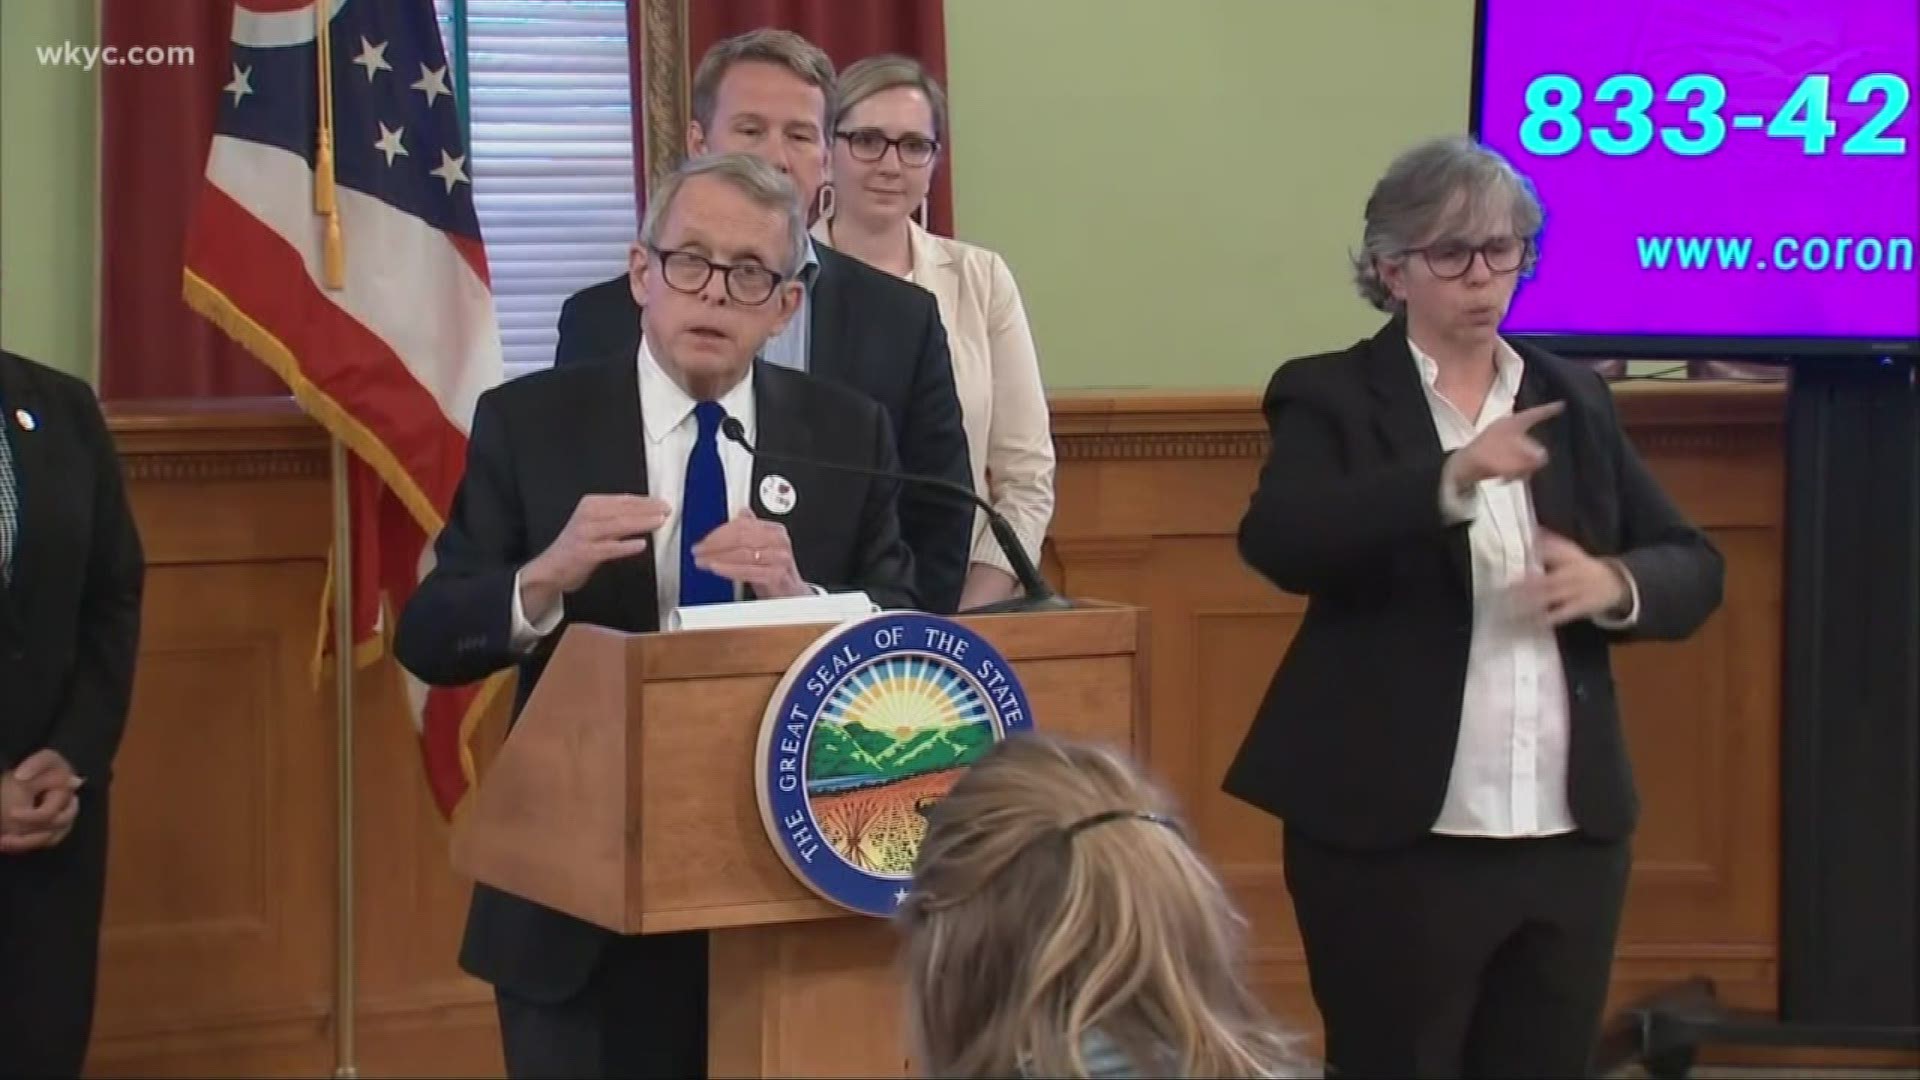 Gov. DeWine says a spike in cases is to be expected. Andrew Horansky has the latest.